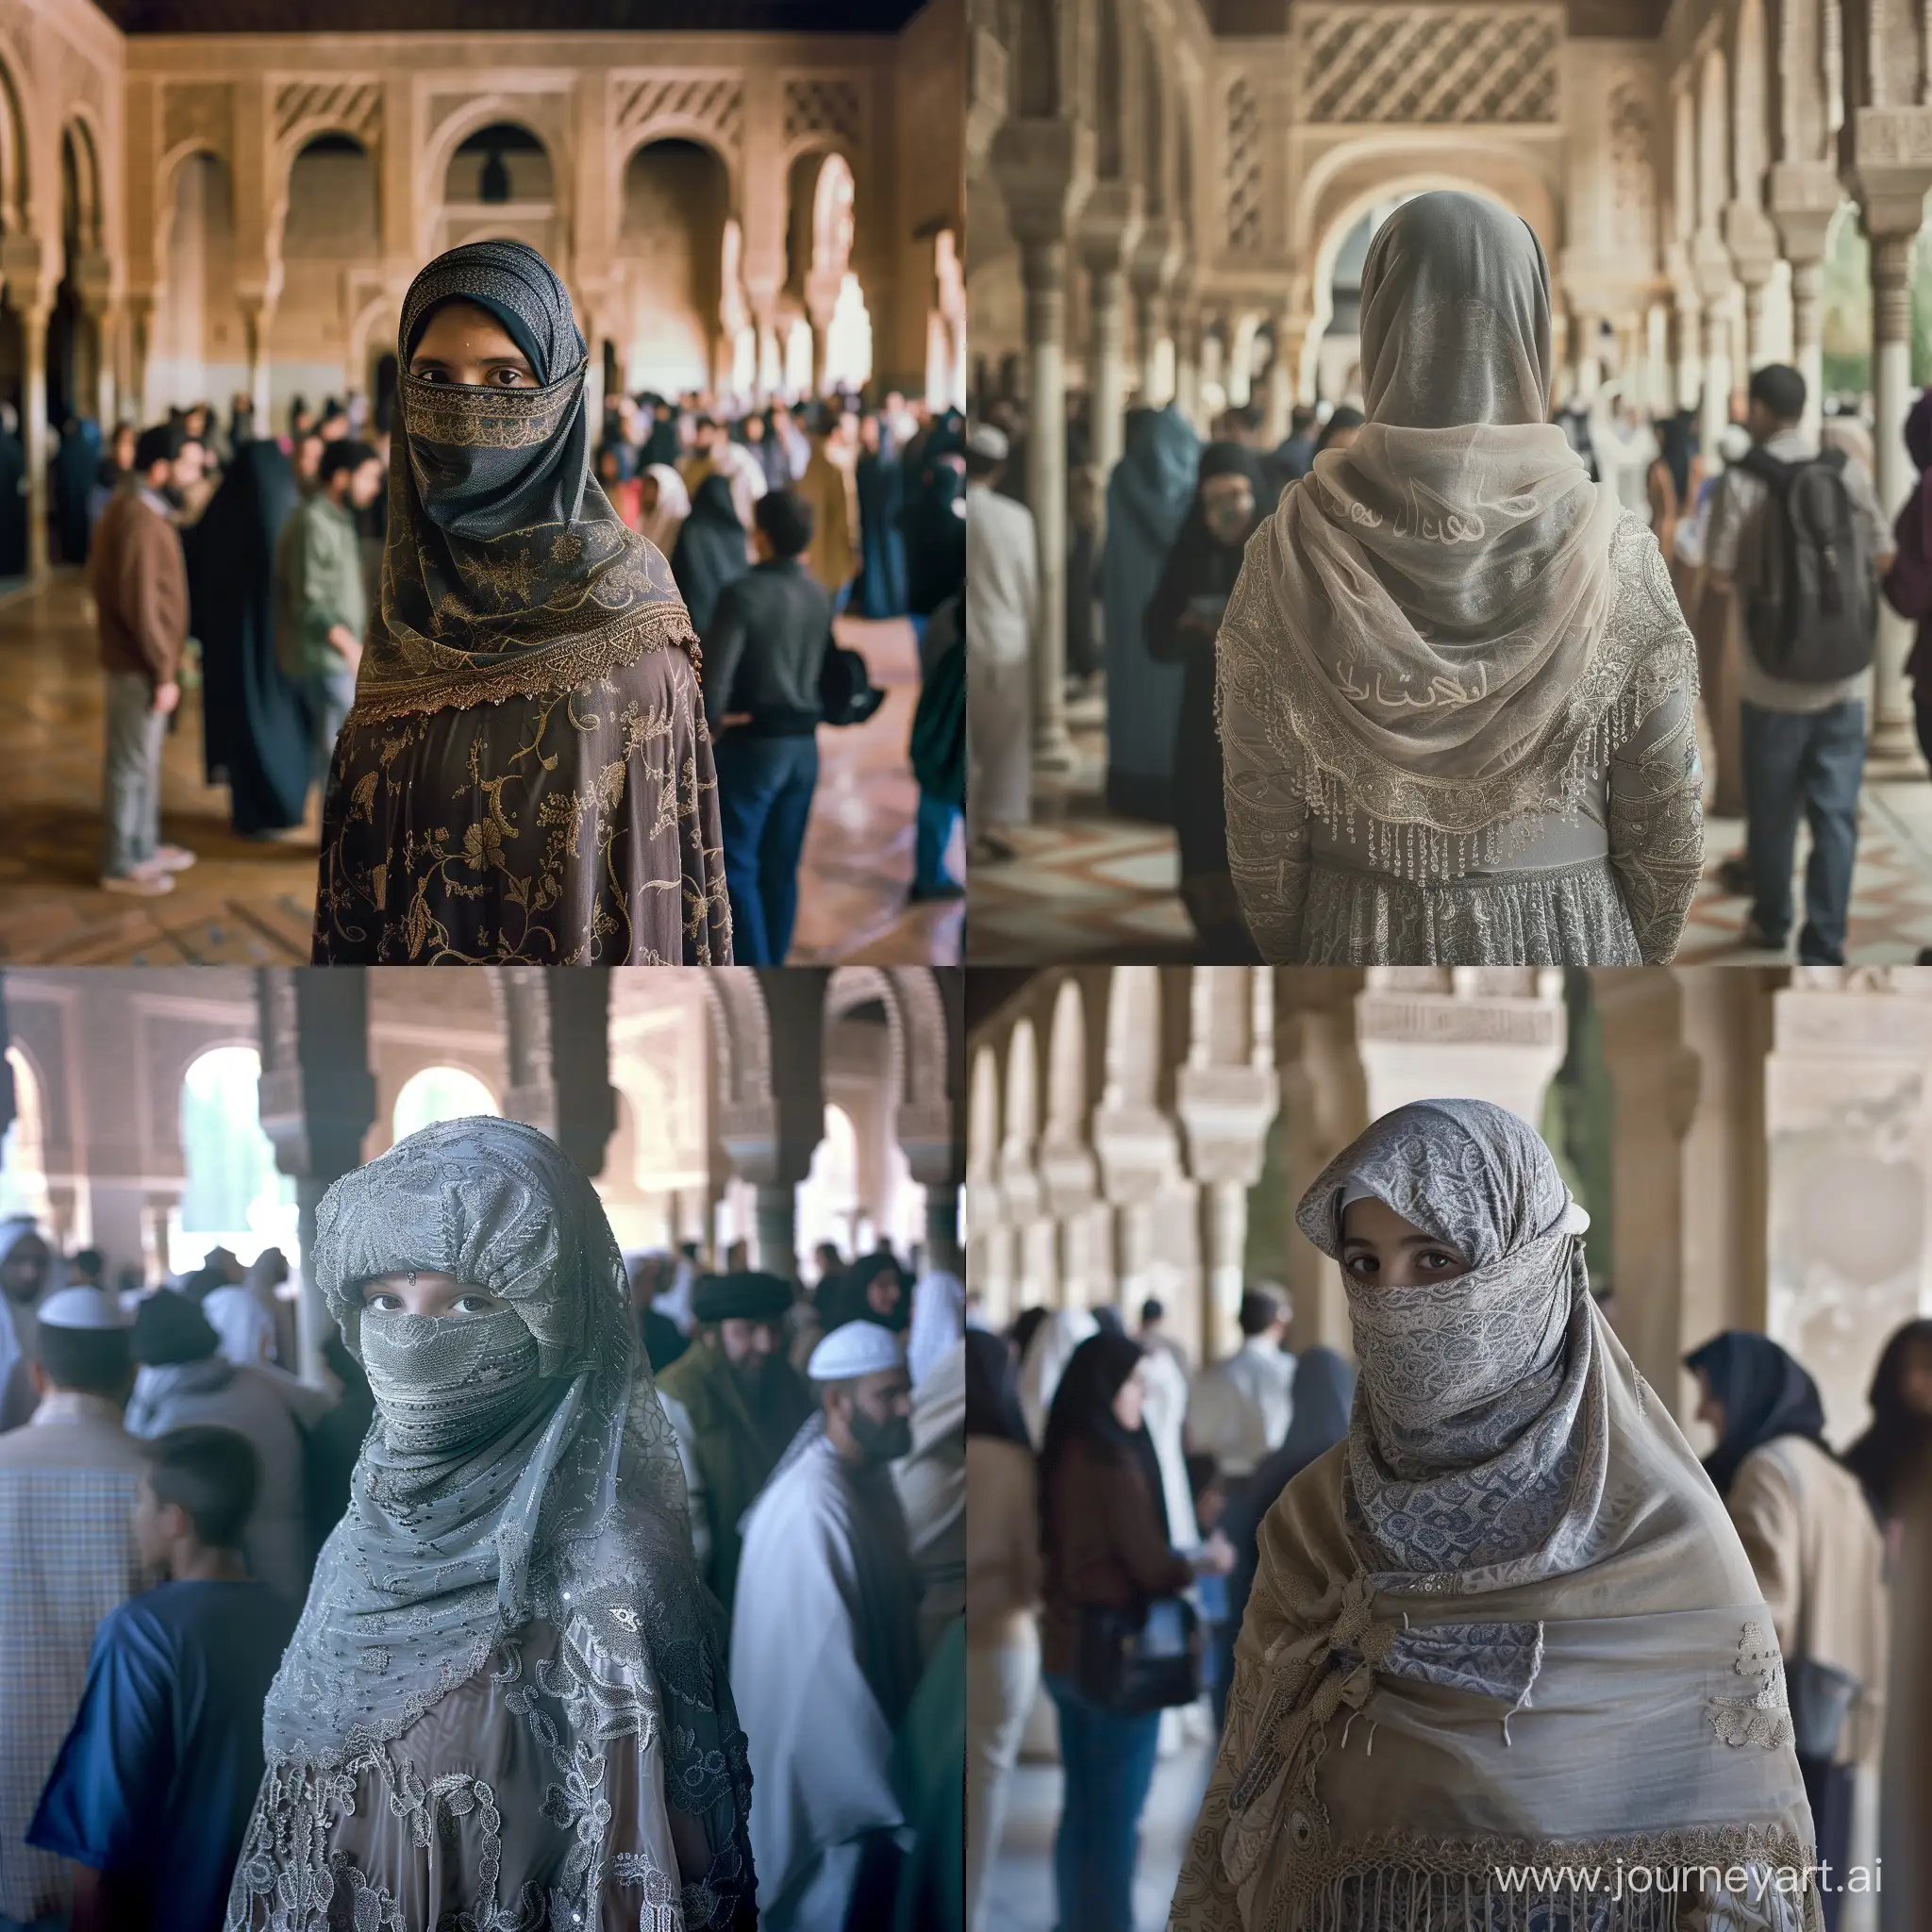 Saudi-Girl-in-Traditional-Veil-Amidst-Alhambra-Palace-Crowds